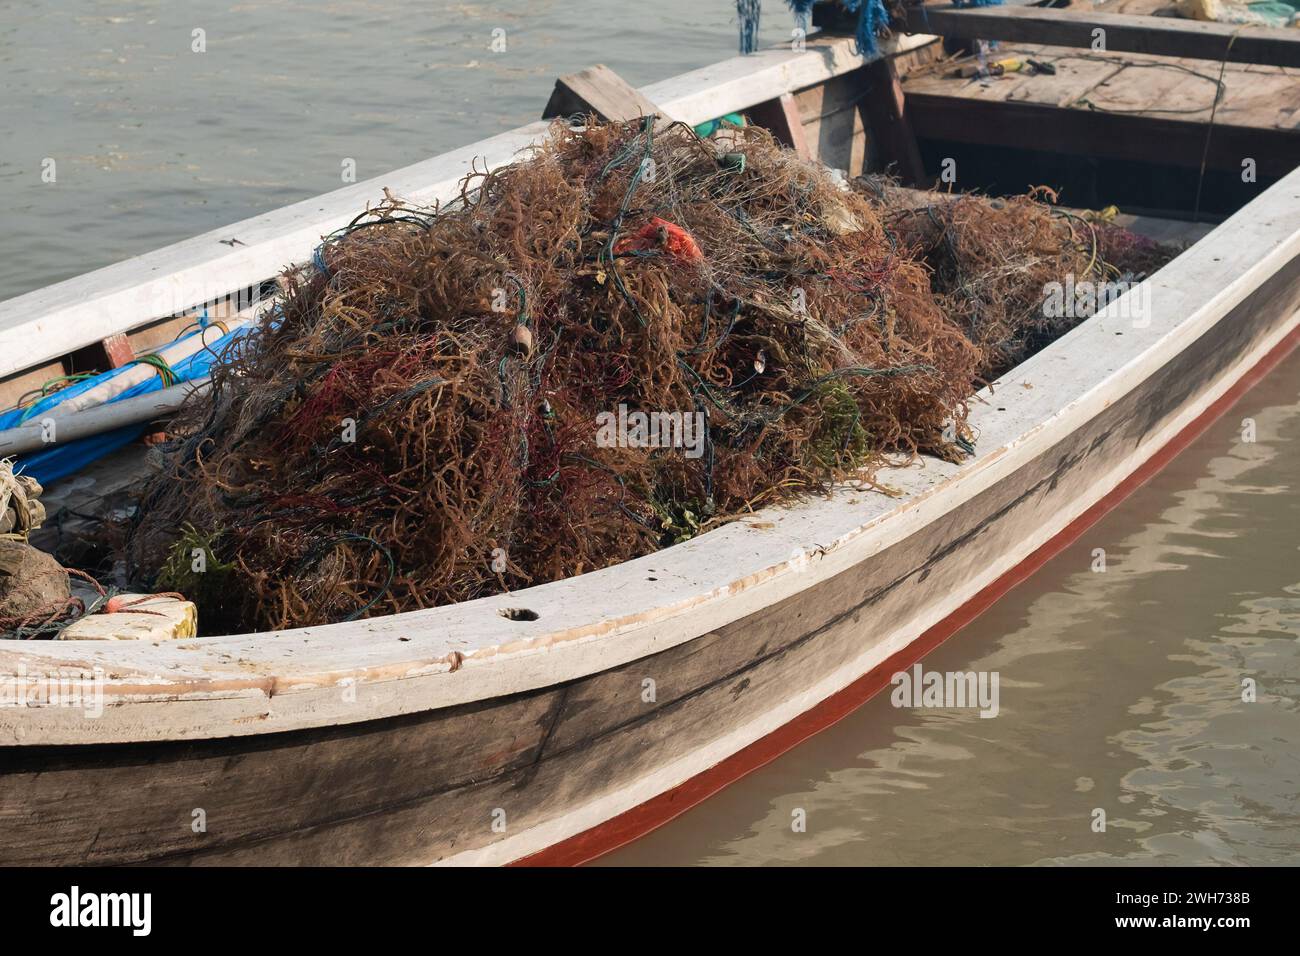 A pile of fishing nets and seaweed on a boat on a pier Stock Photo